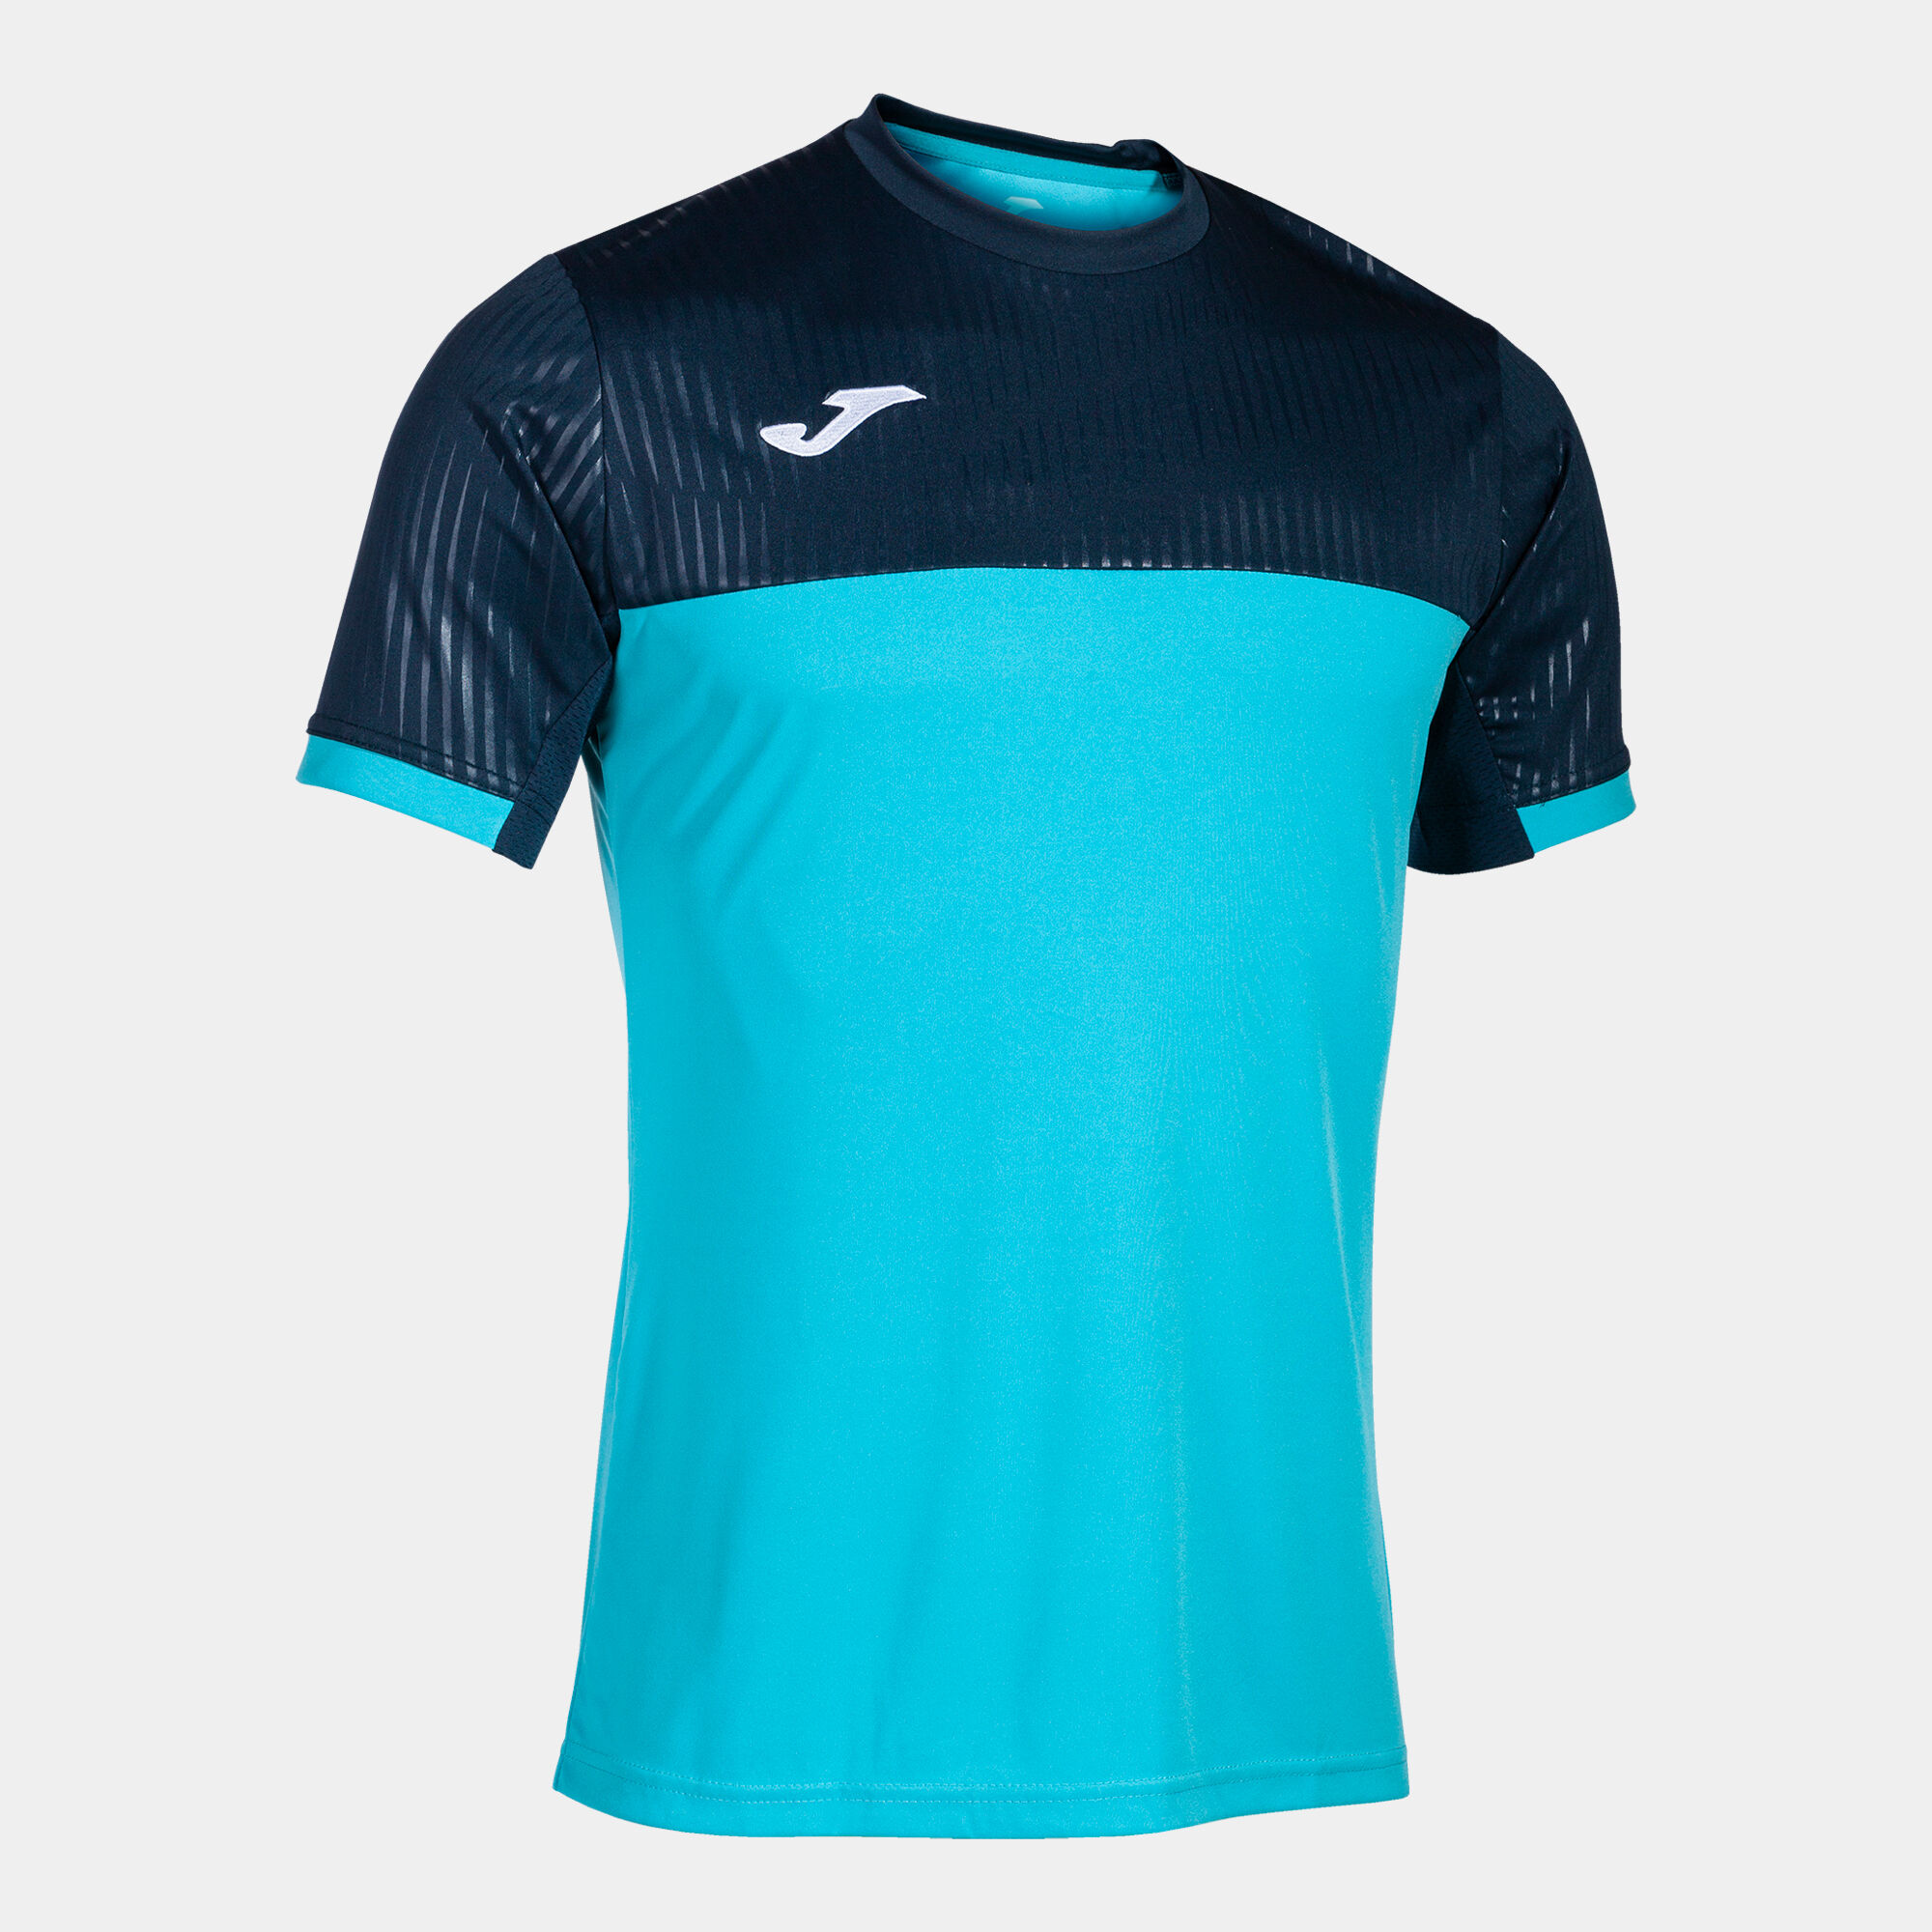 MAILLOT MANCHES COURTES HOMME MONTREAL TURQUOISE FLUO BLEU MARINE